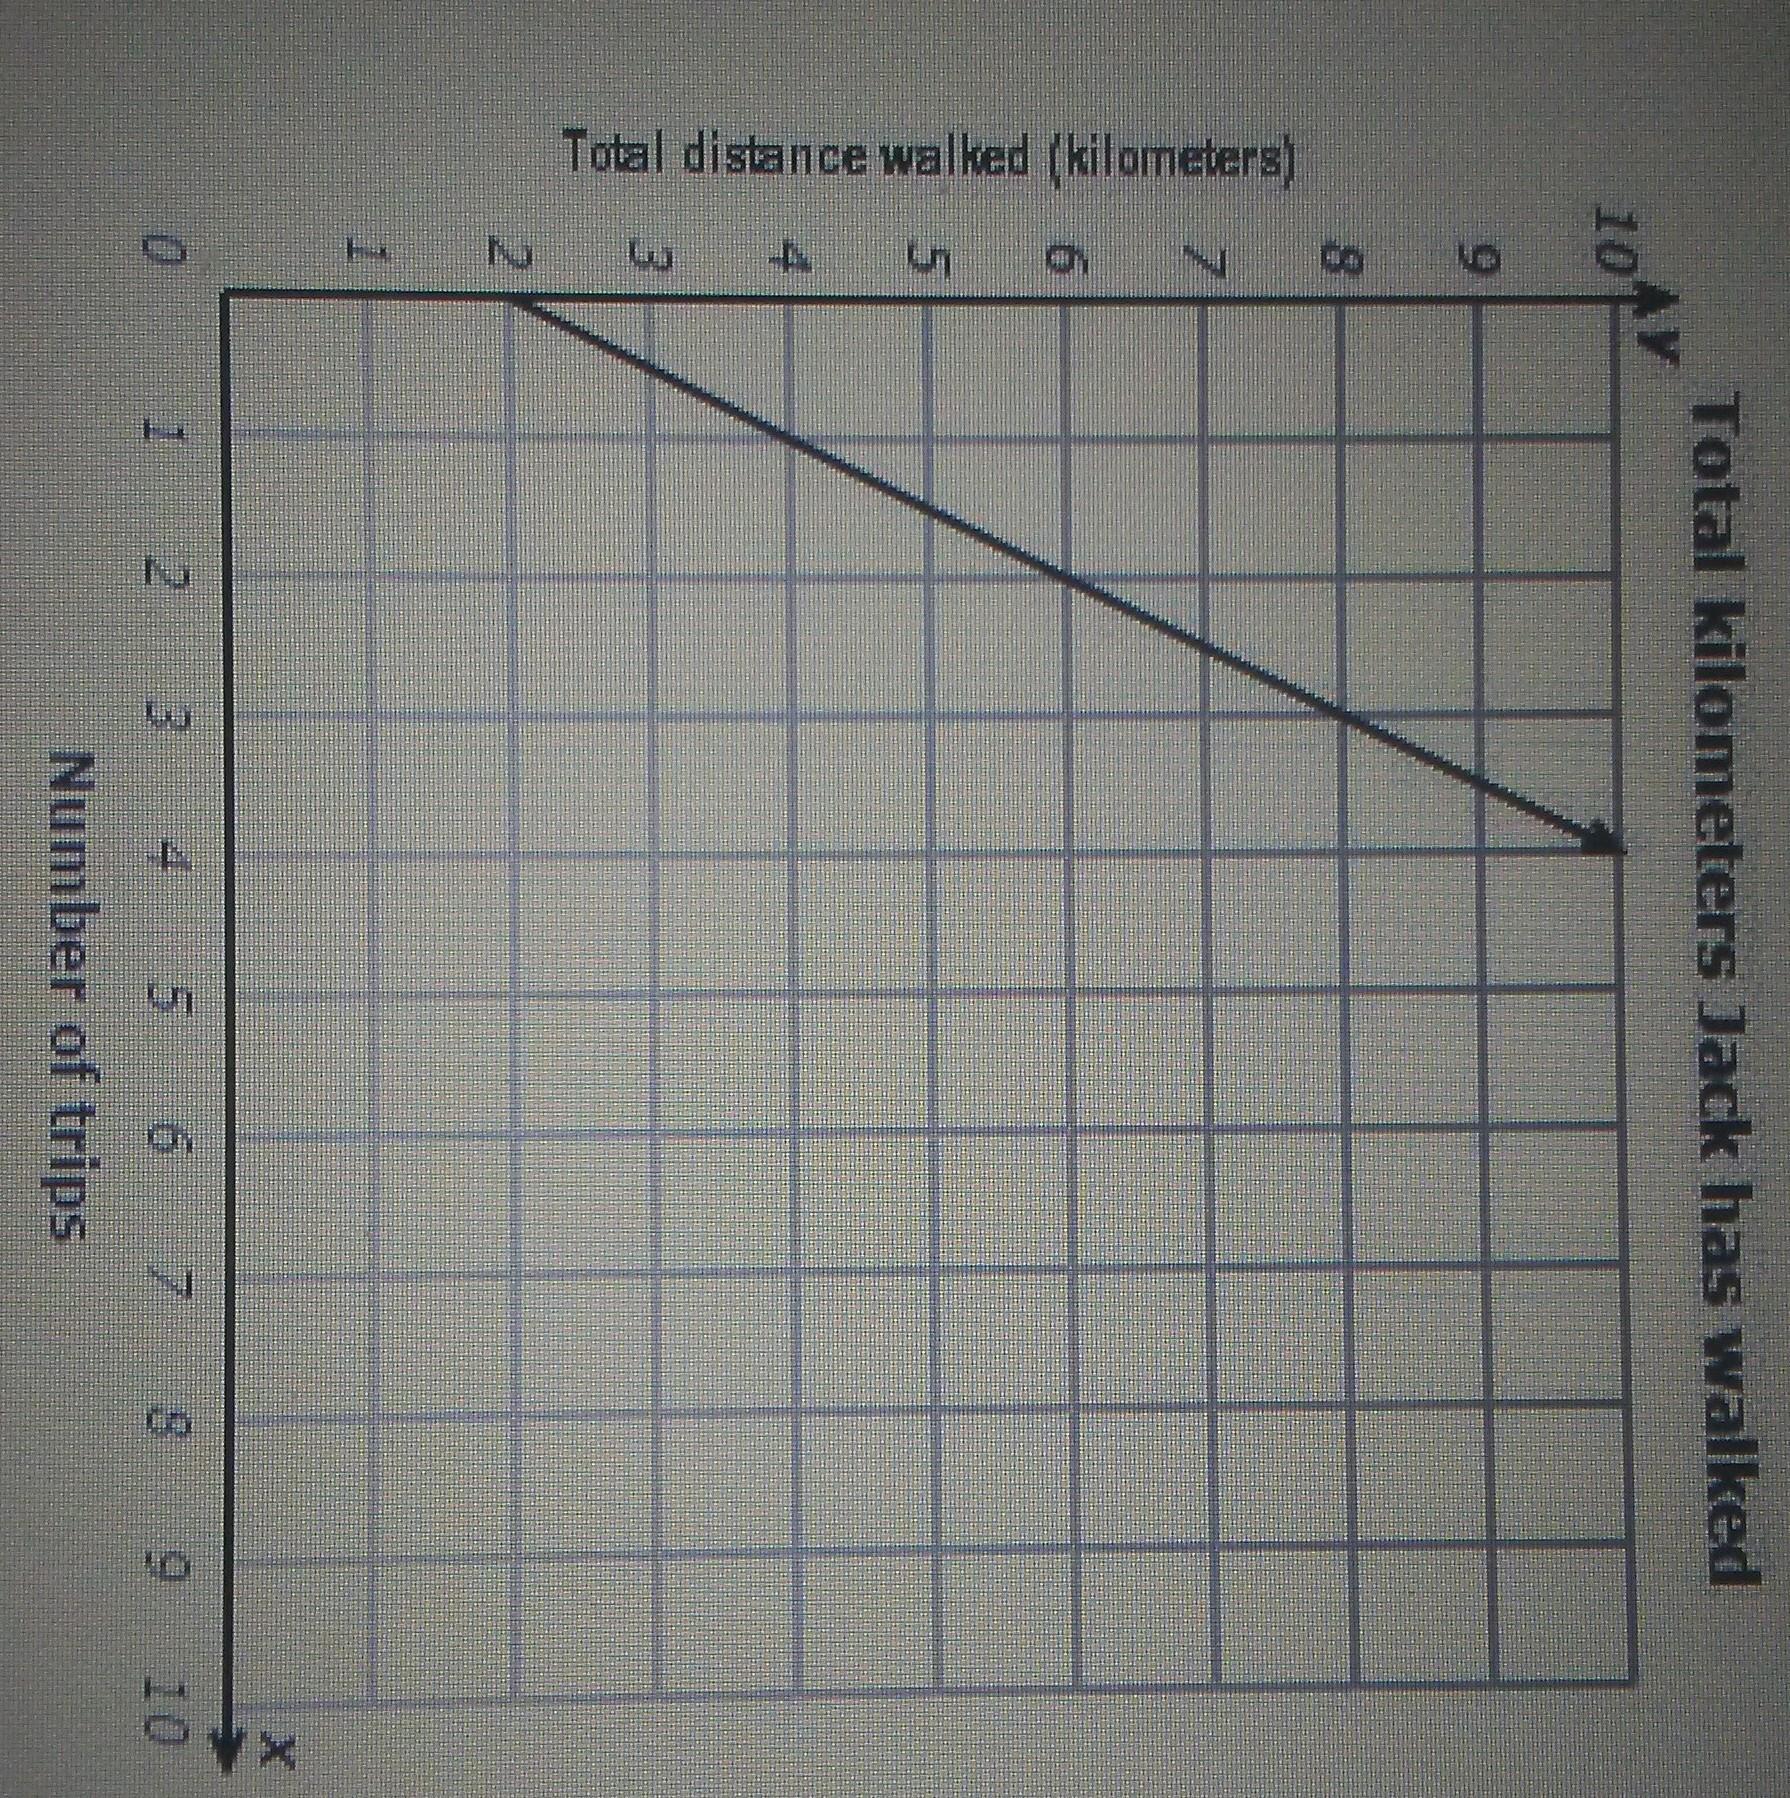 ASAP Please Help And ThankyouThis Graph Shows How The Total Distance Jack Has Walked Depends On The Number